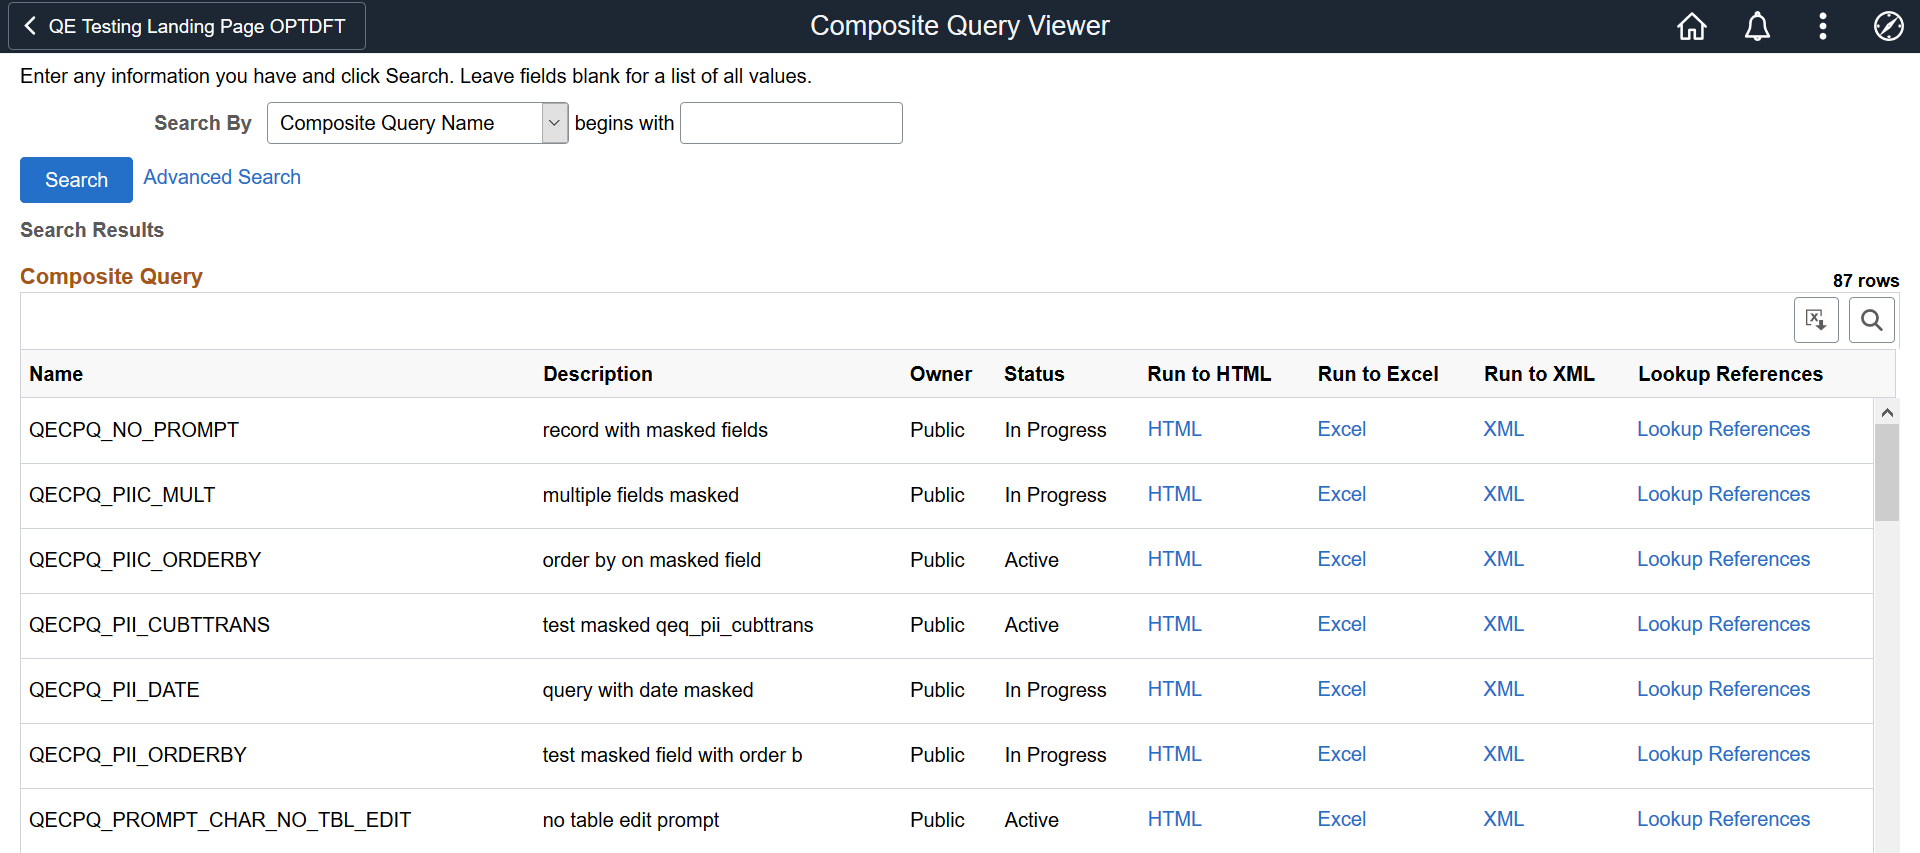 Composite Query Viewer page